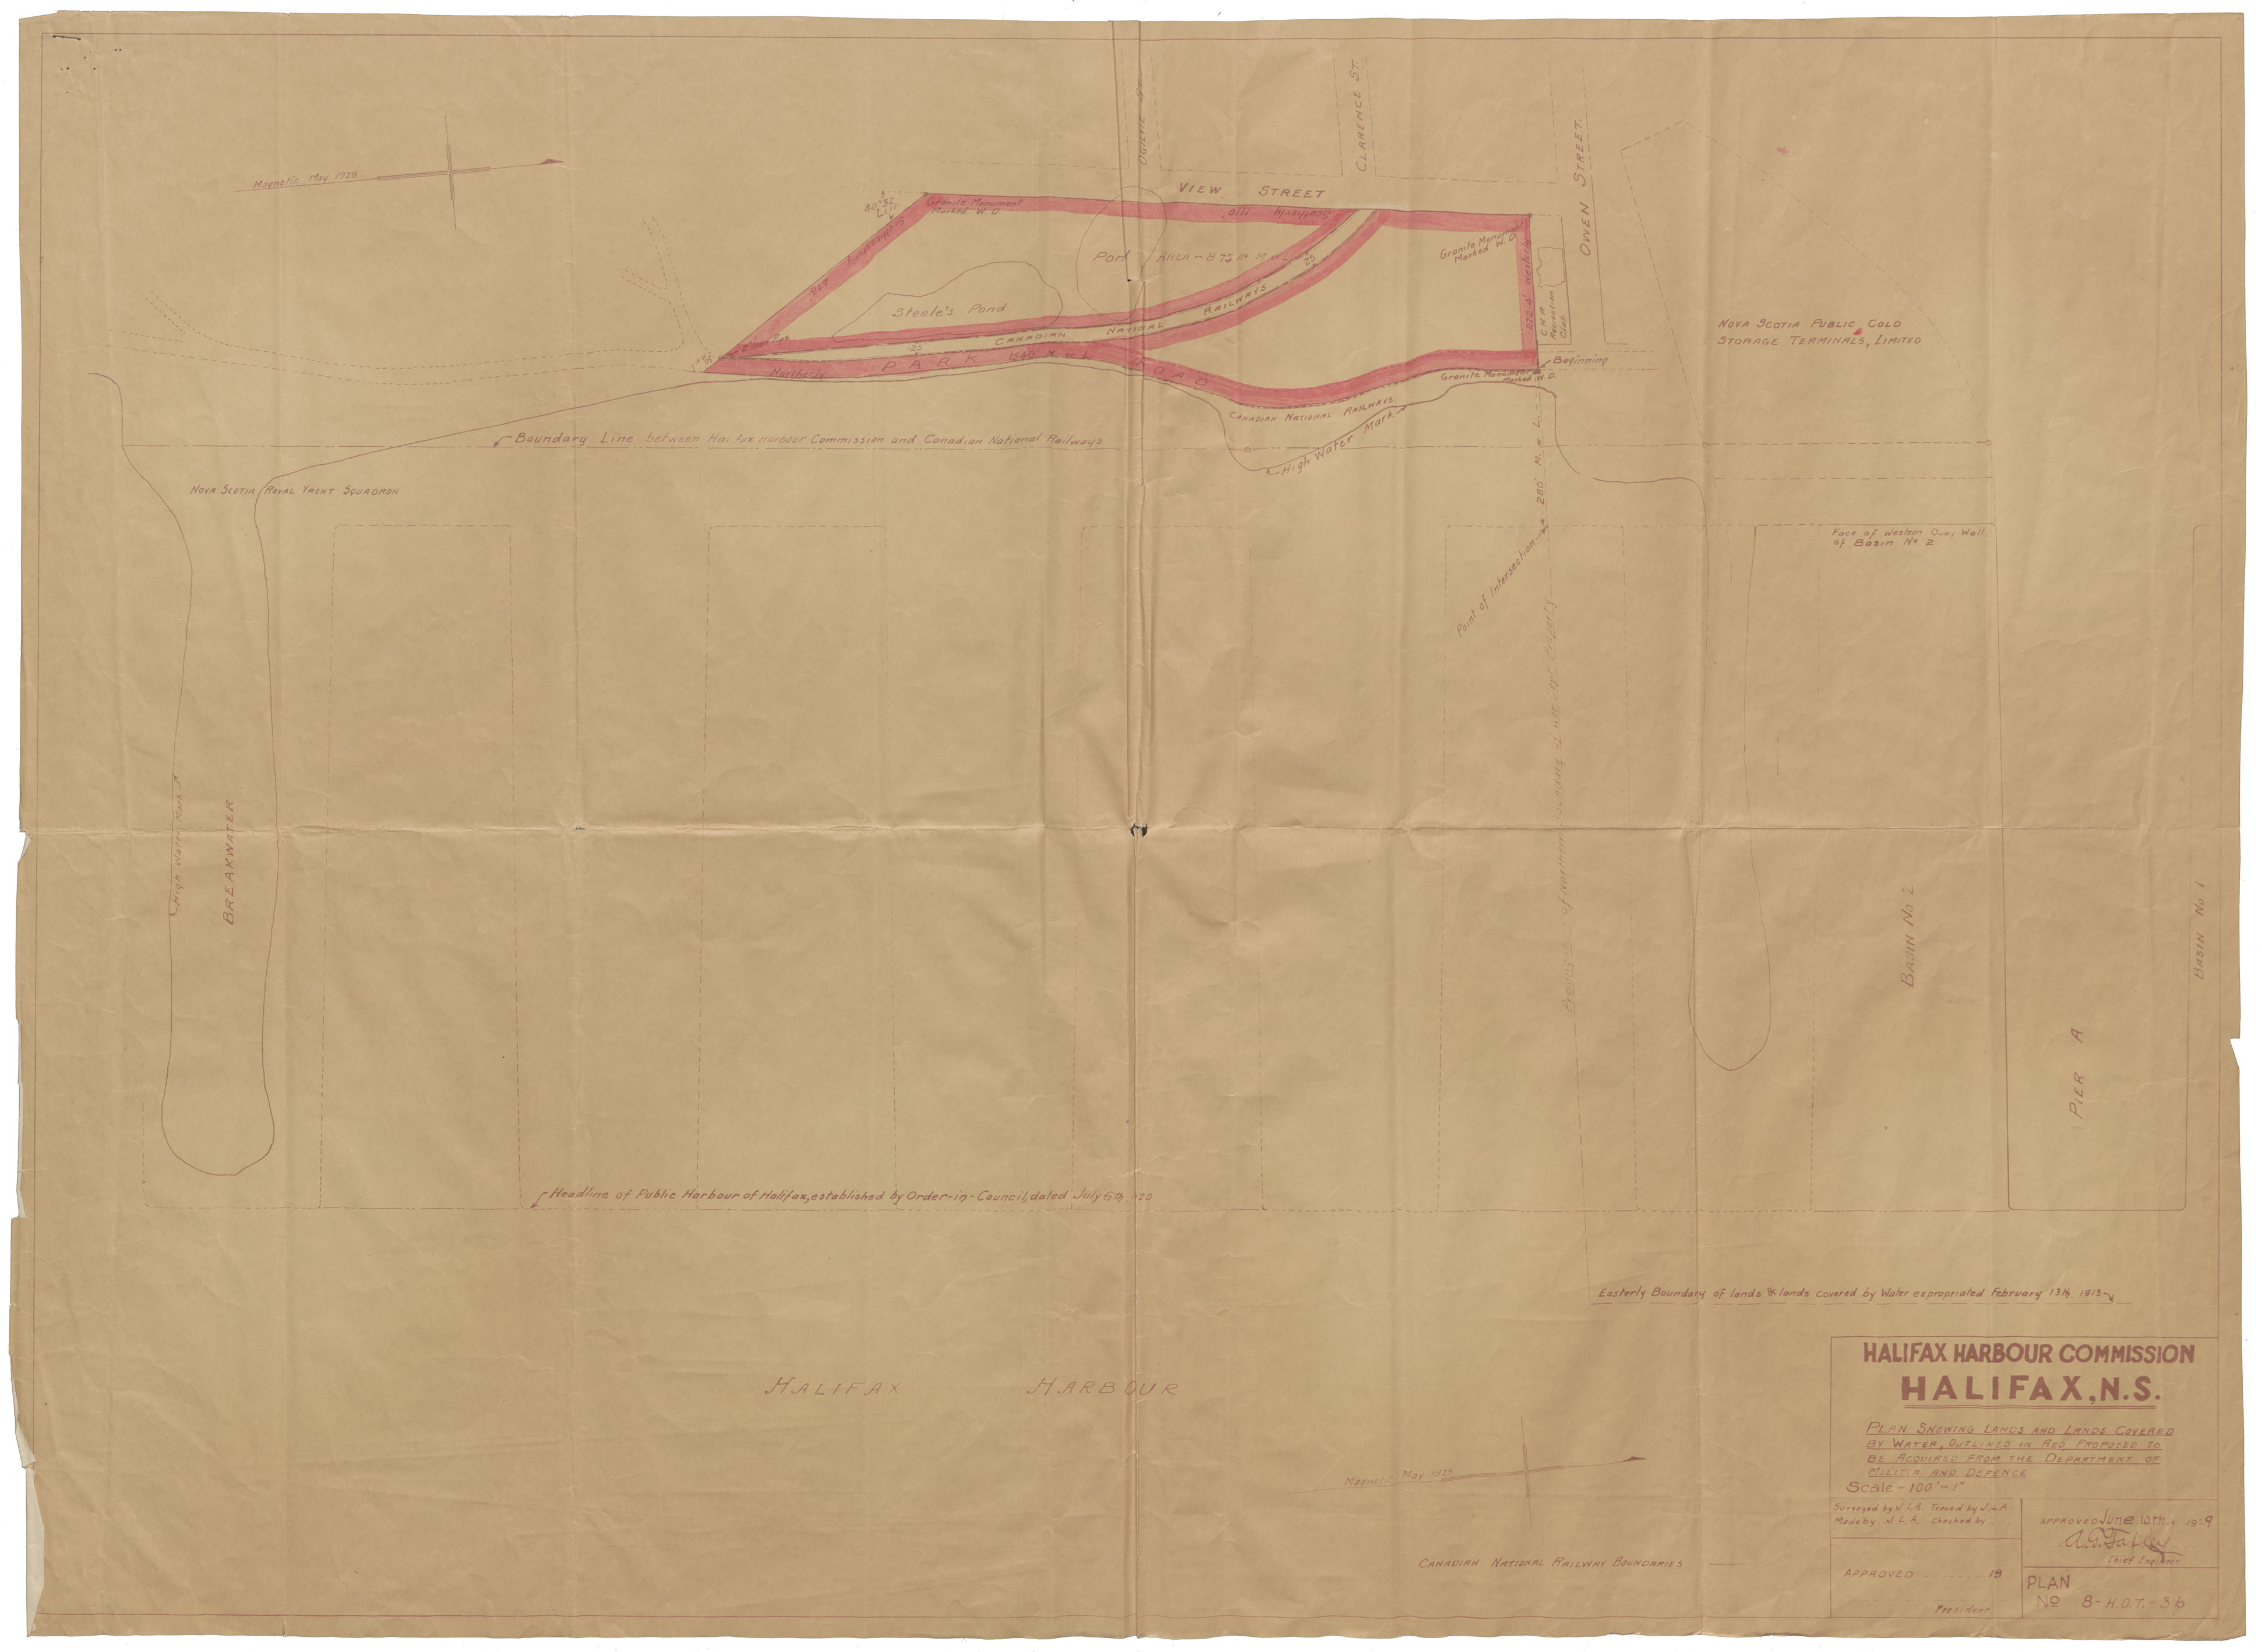 Halifax Harbour Commission Halifax, N.S. Plan showing Lands and Lands Covered by Water, Outlined in Red Proposed to be Acquired from the Department of Militia and Defense